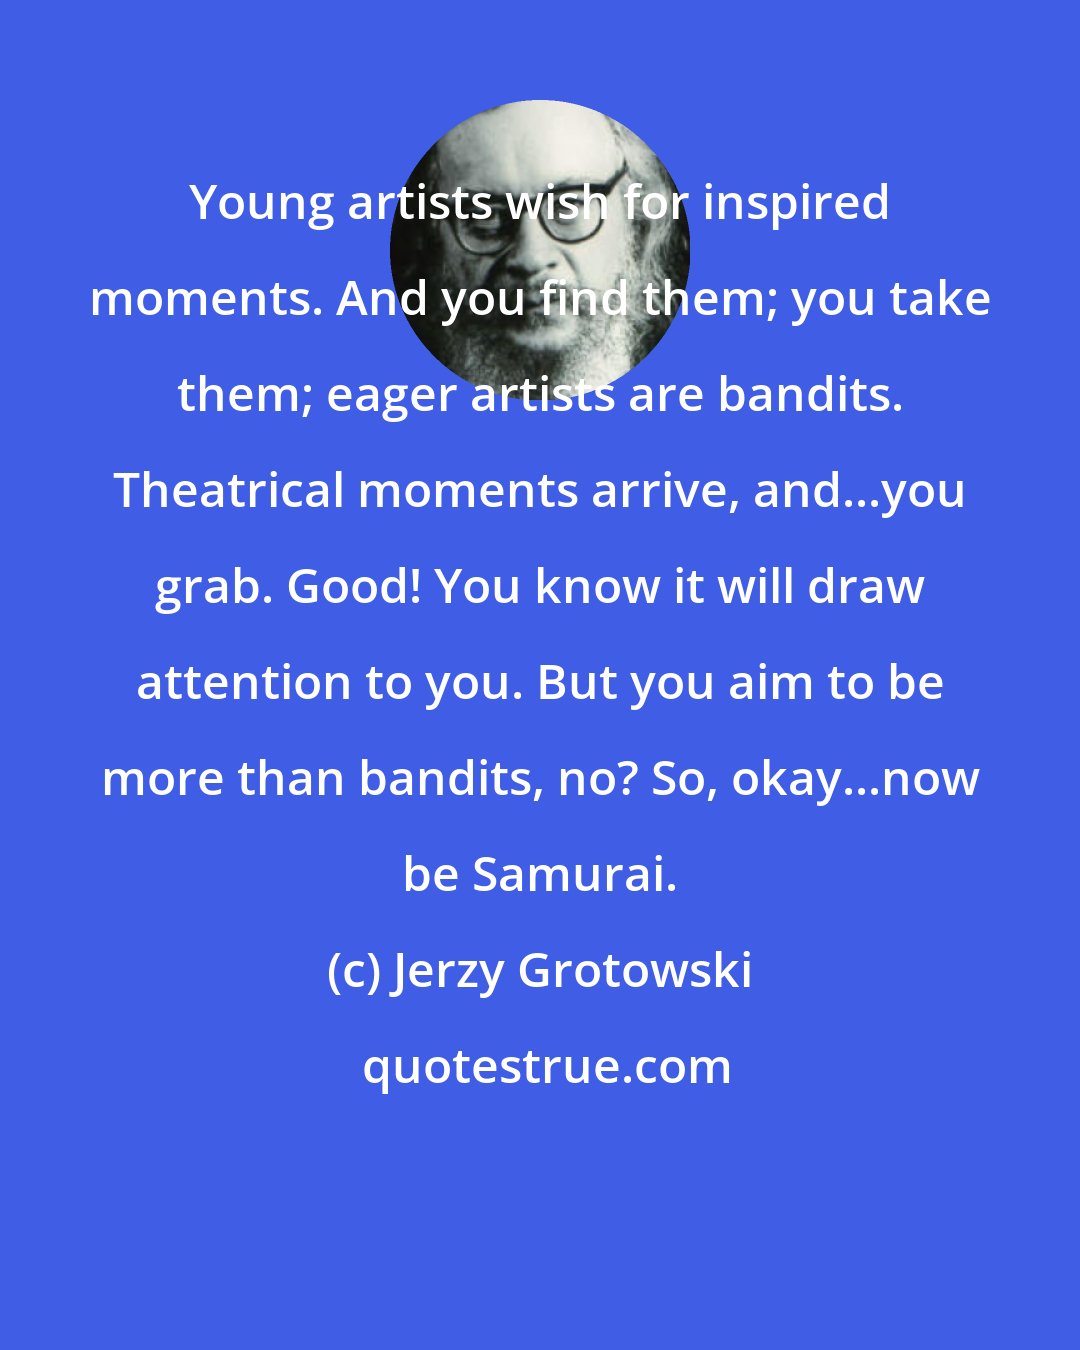 Jerzy Grotowski: Young artists wish for inspired moments. And you find them; you take them; eager artists are bandits. Theatrical moments arrive, and...you grab. Good! You know it will draw attention to you. But you aim to be more than bandits, no? So, okay...now be Samurai.